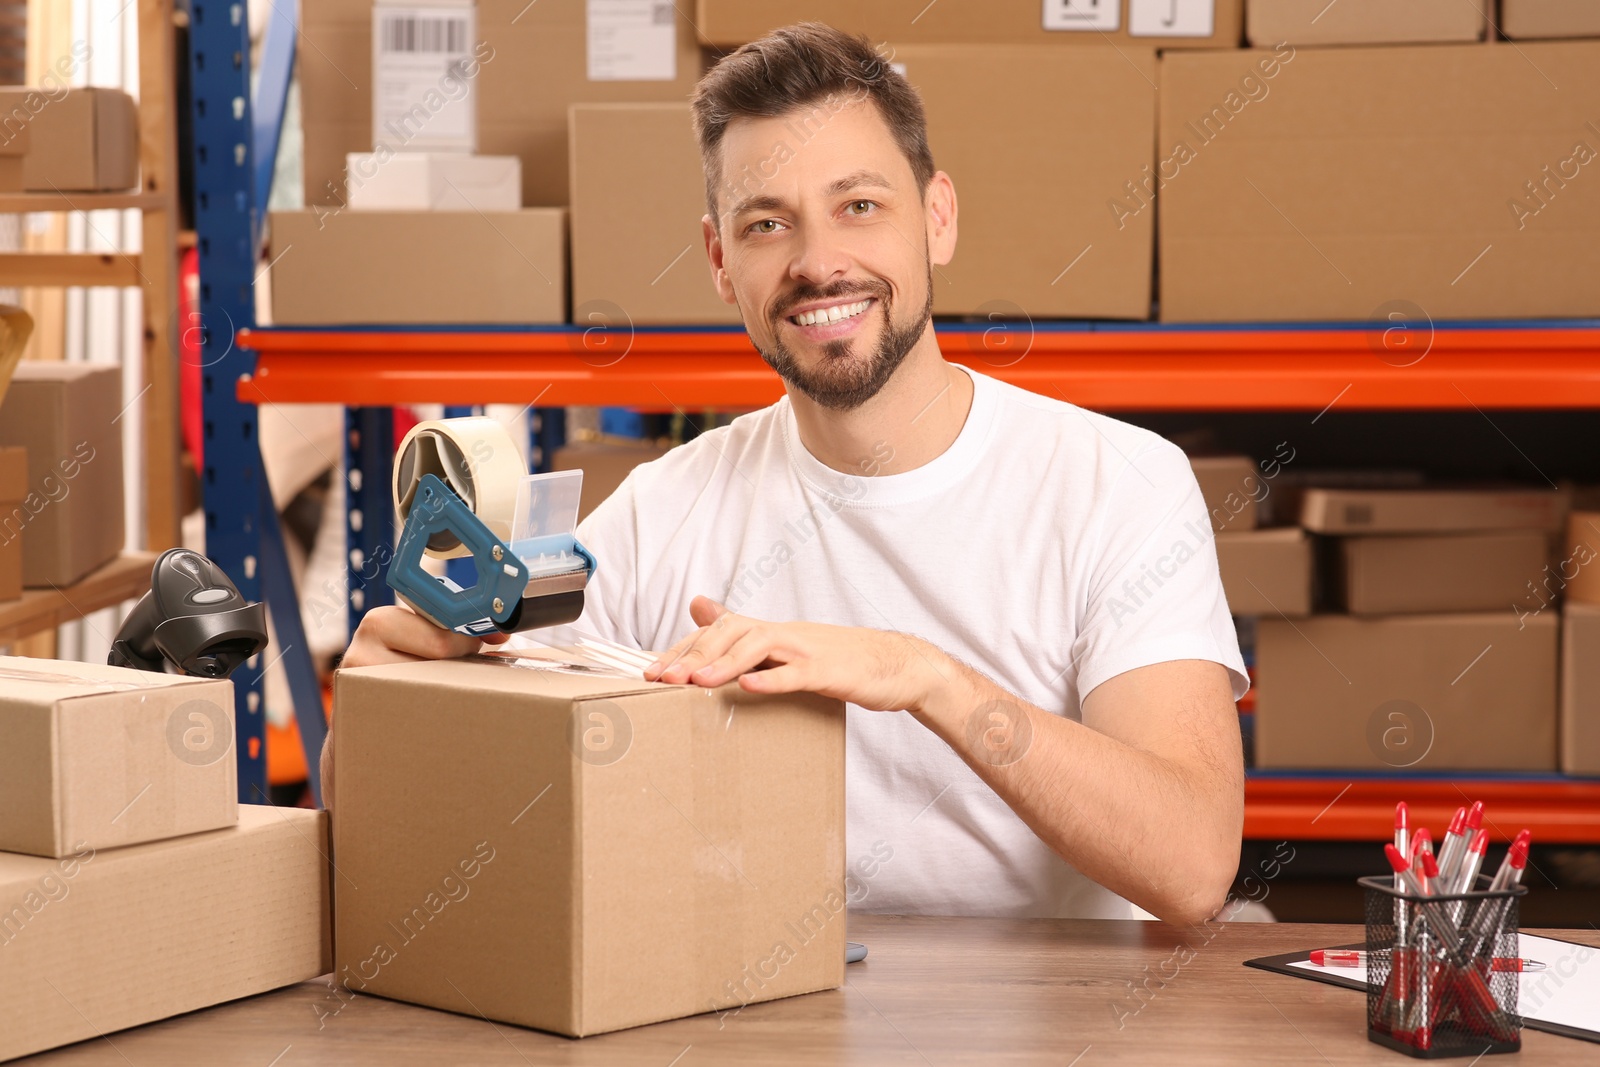 Photo of Post office worker packing parcel at counter indoors